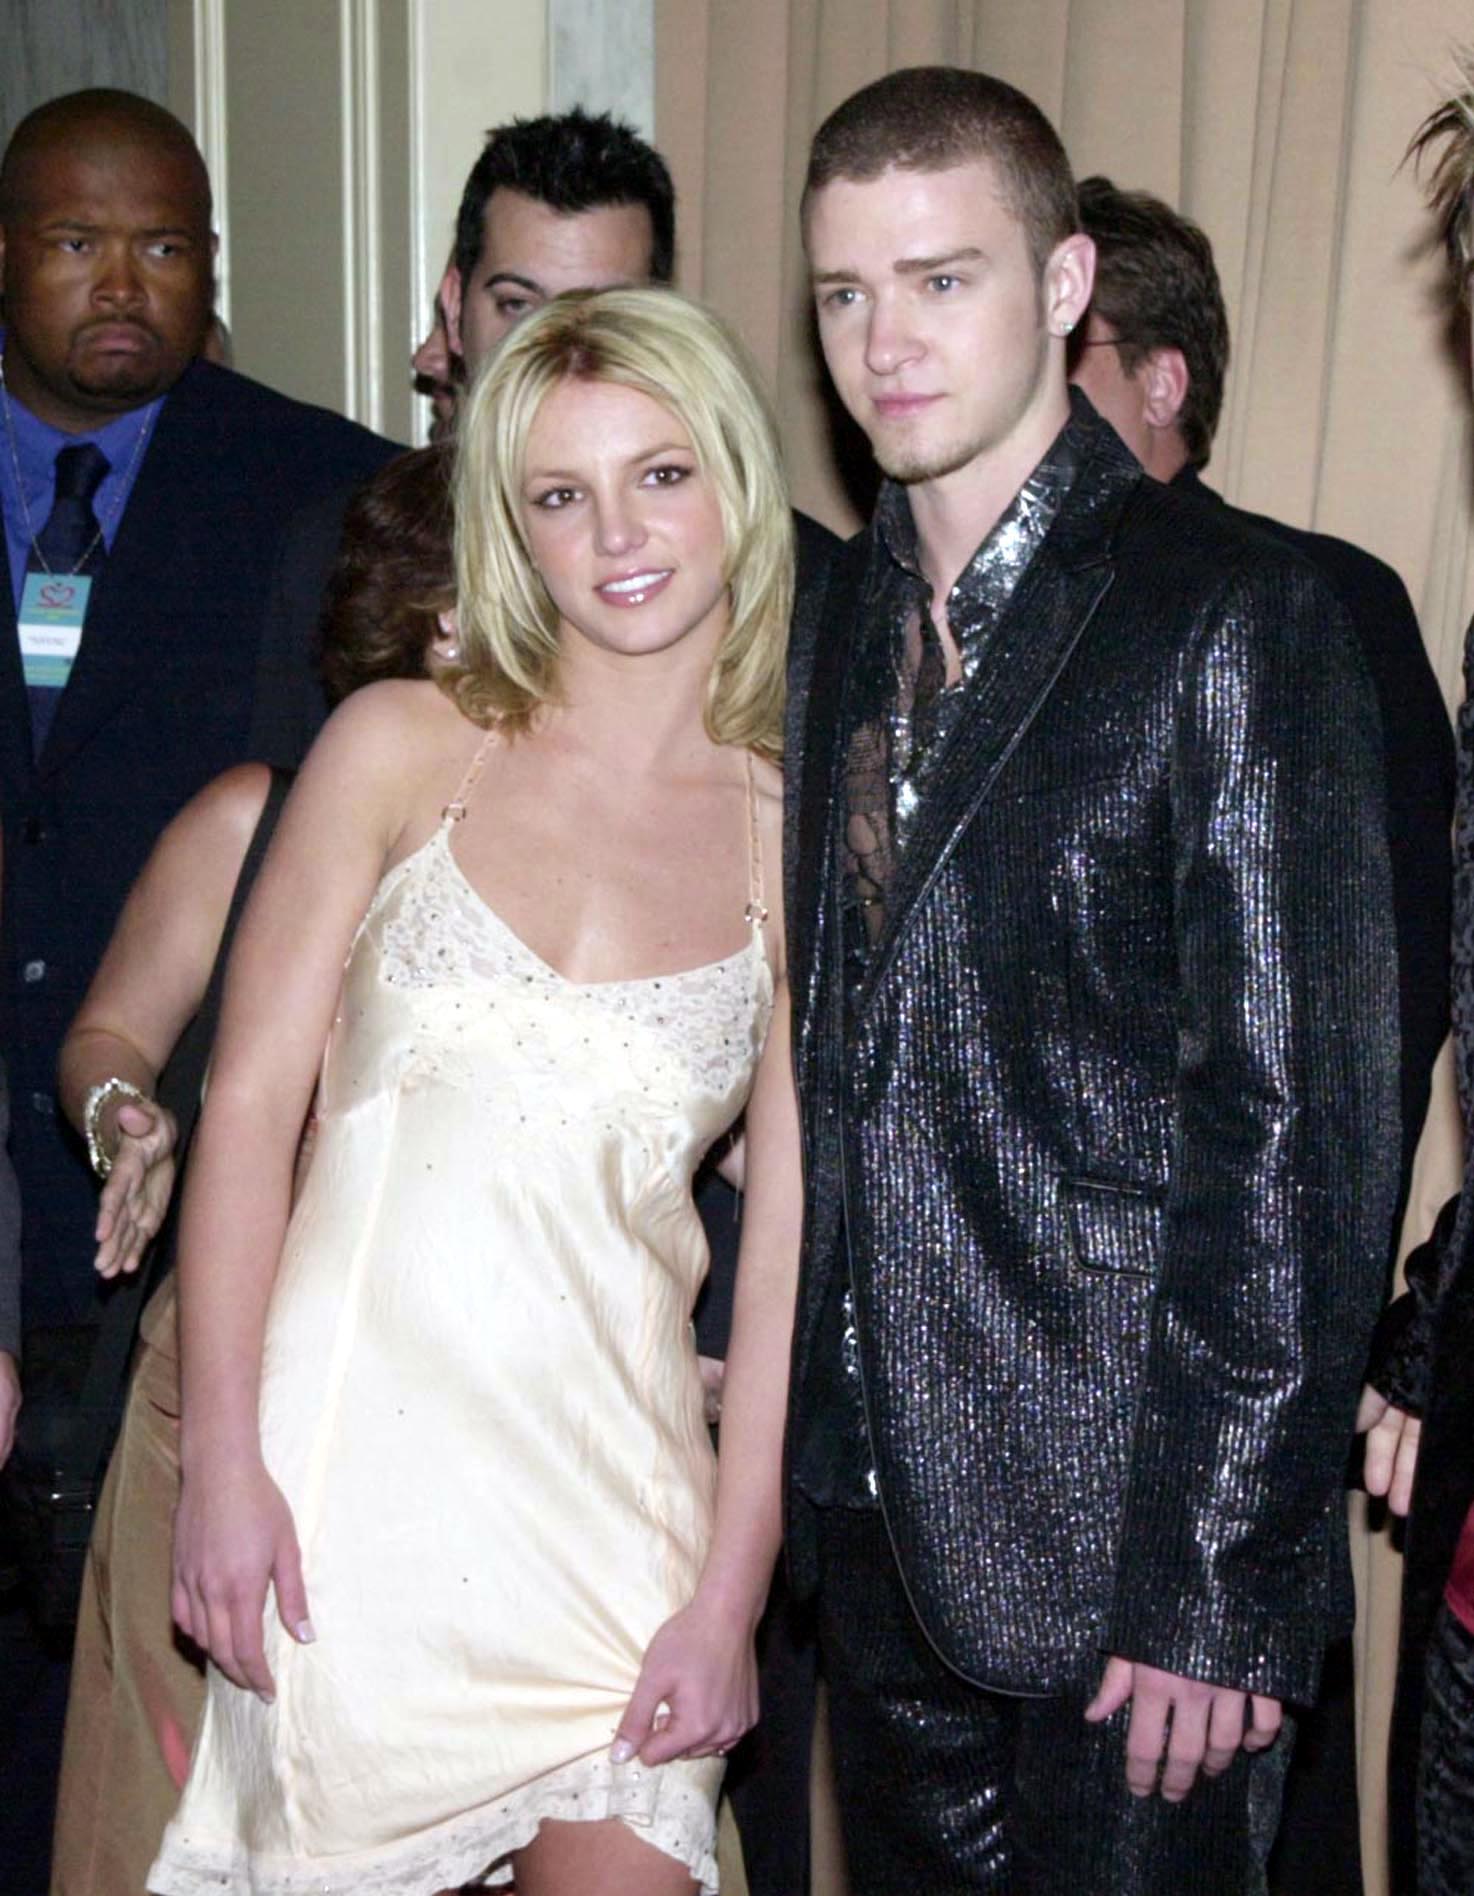 A throwback photo of Britney Spears and Justin Timberlake together at an event.